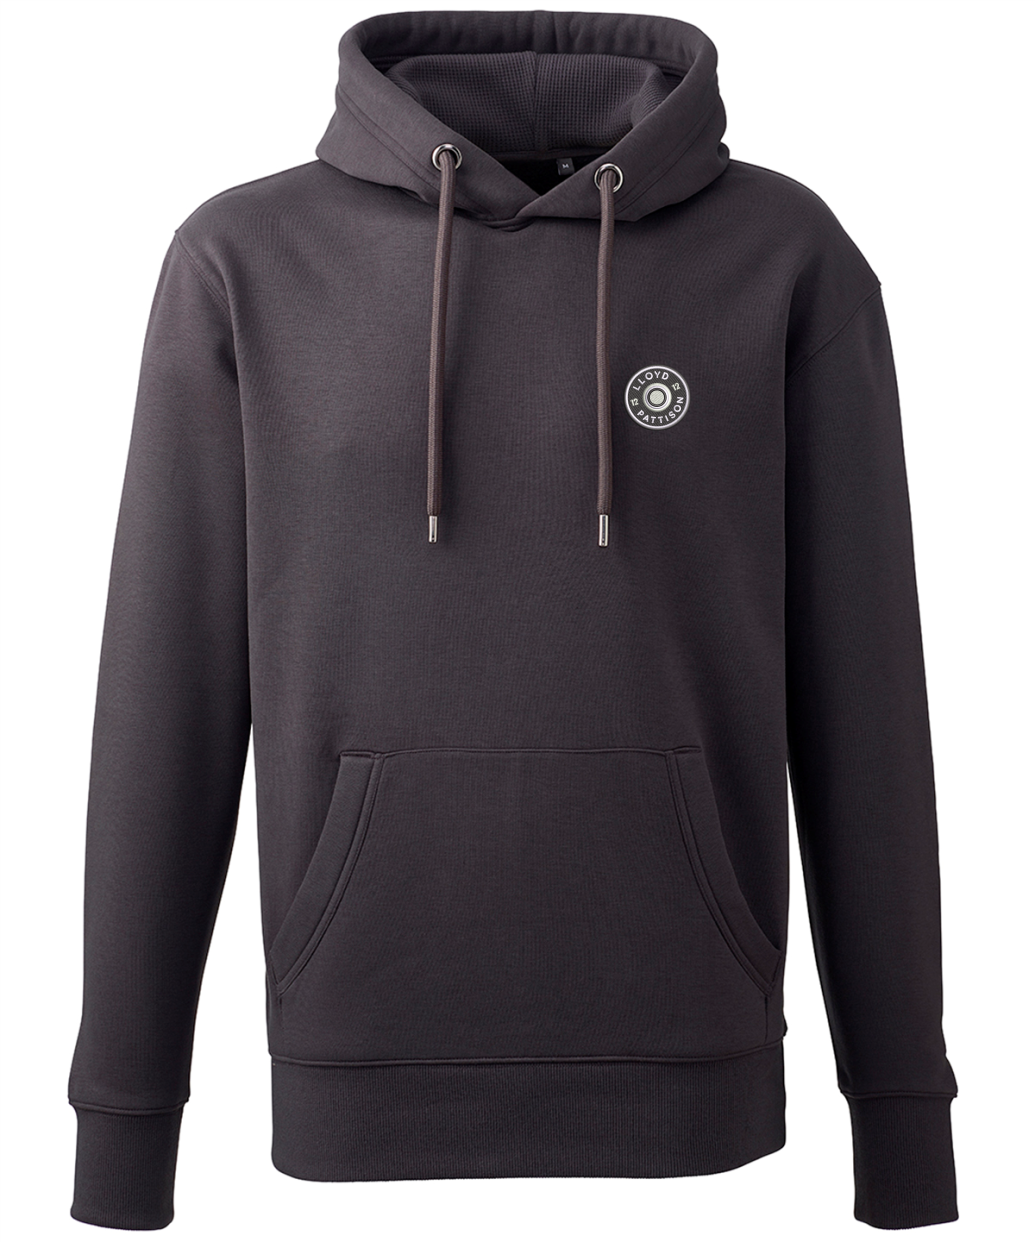 Lloyd Pattison Official Hoodie - Charcoal